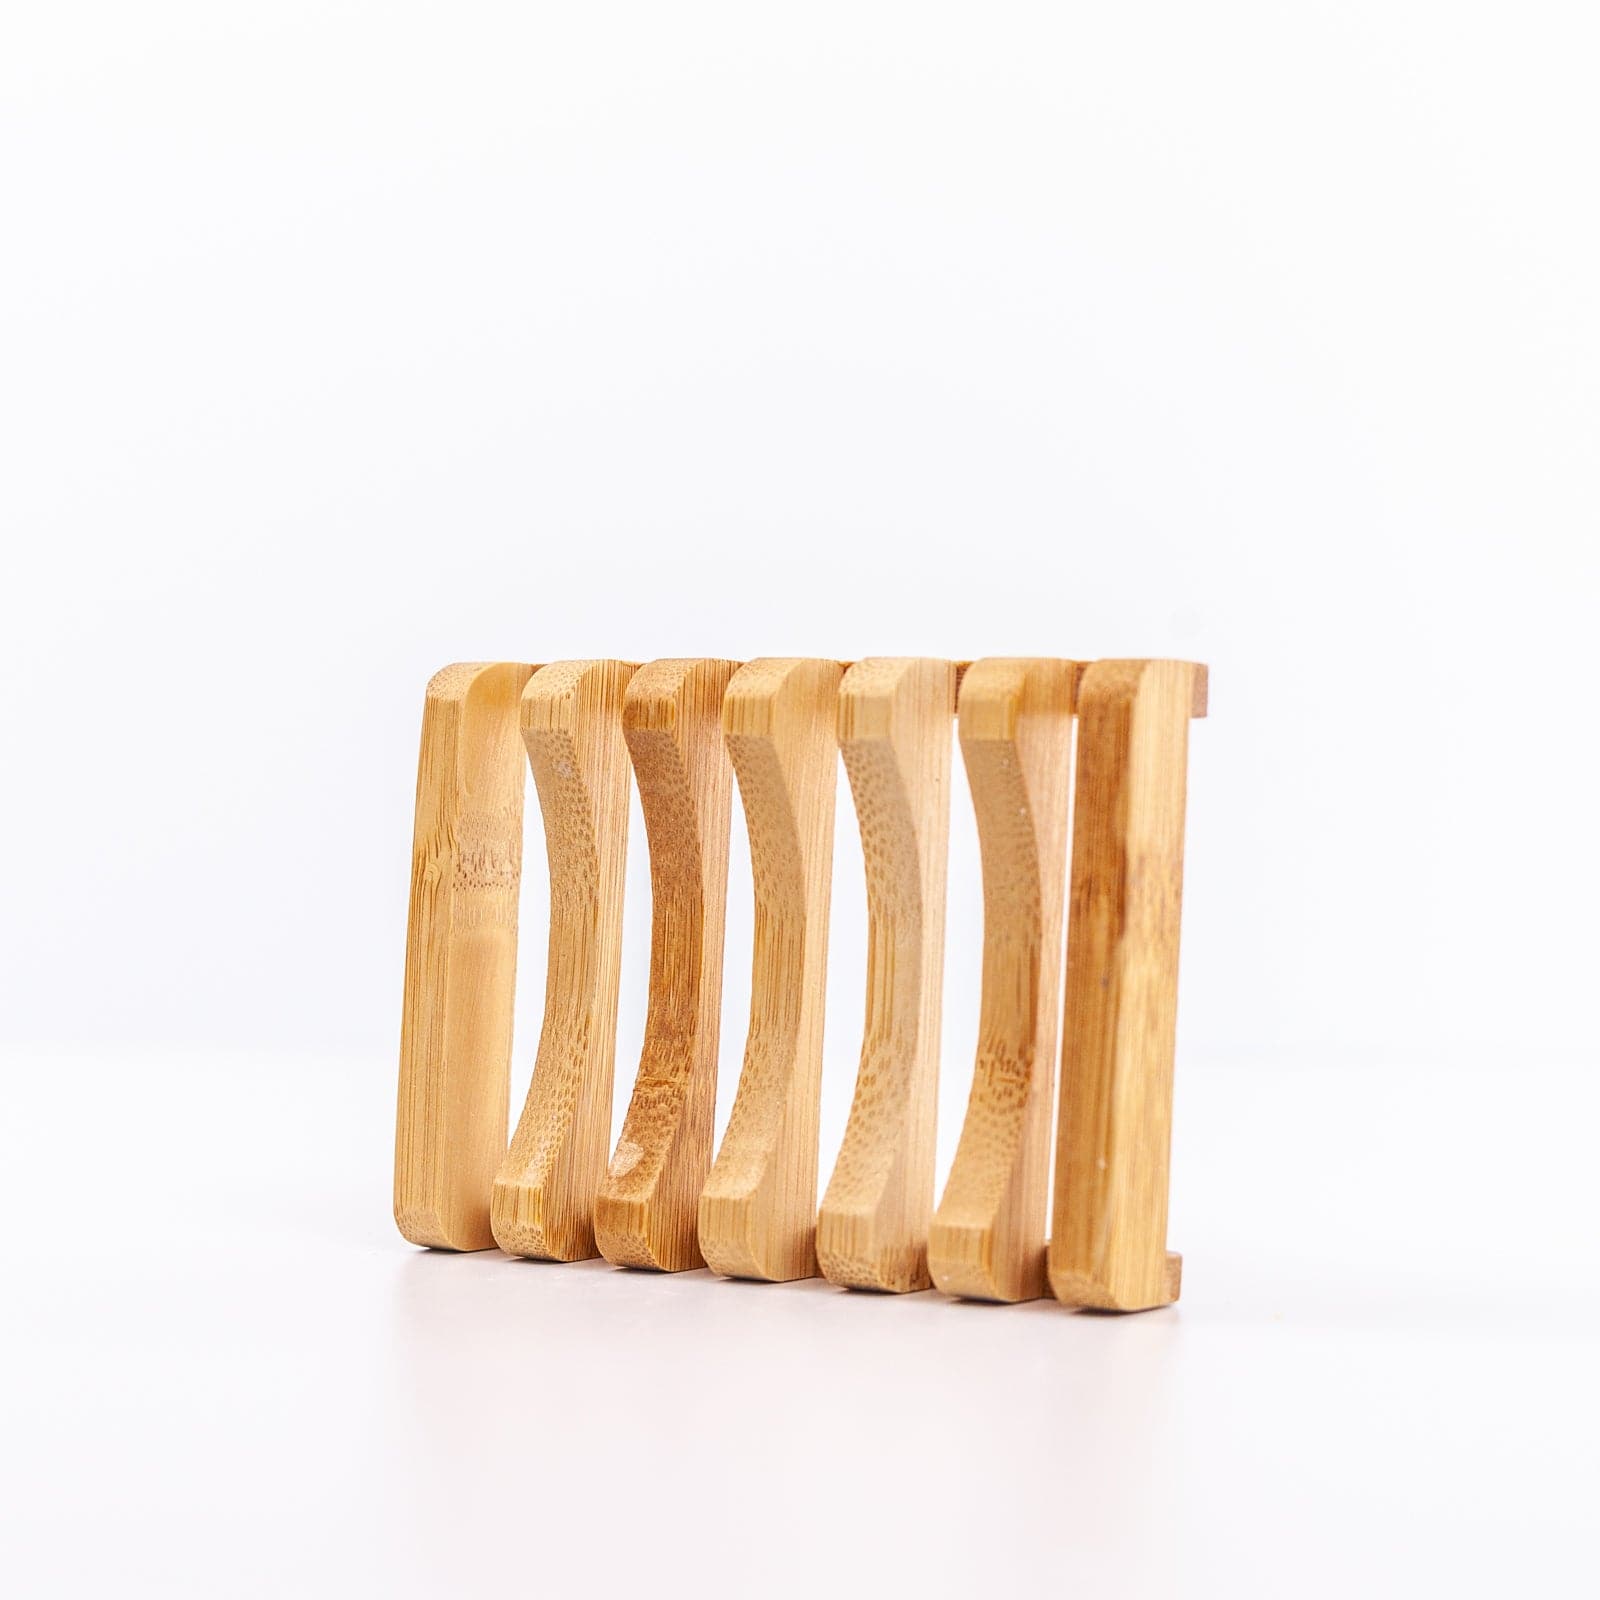 Angled view of wooden soap dish on its side